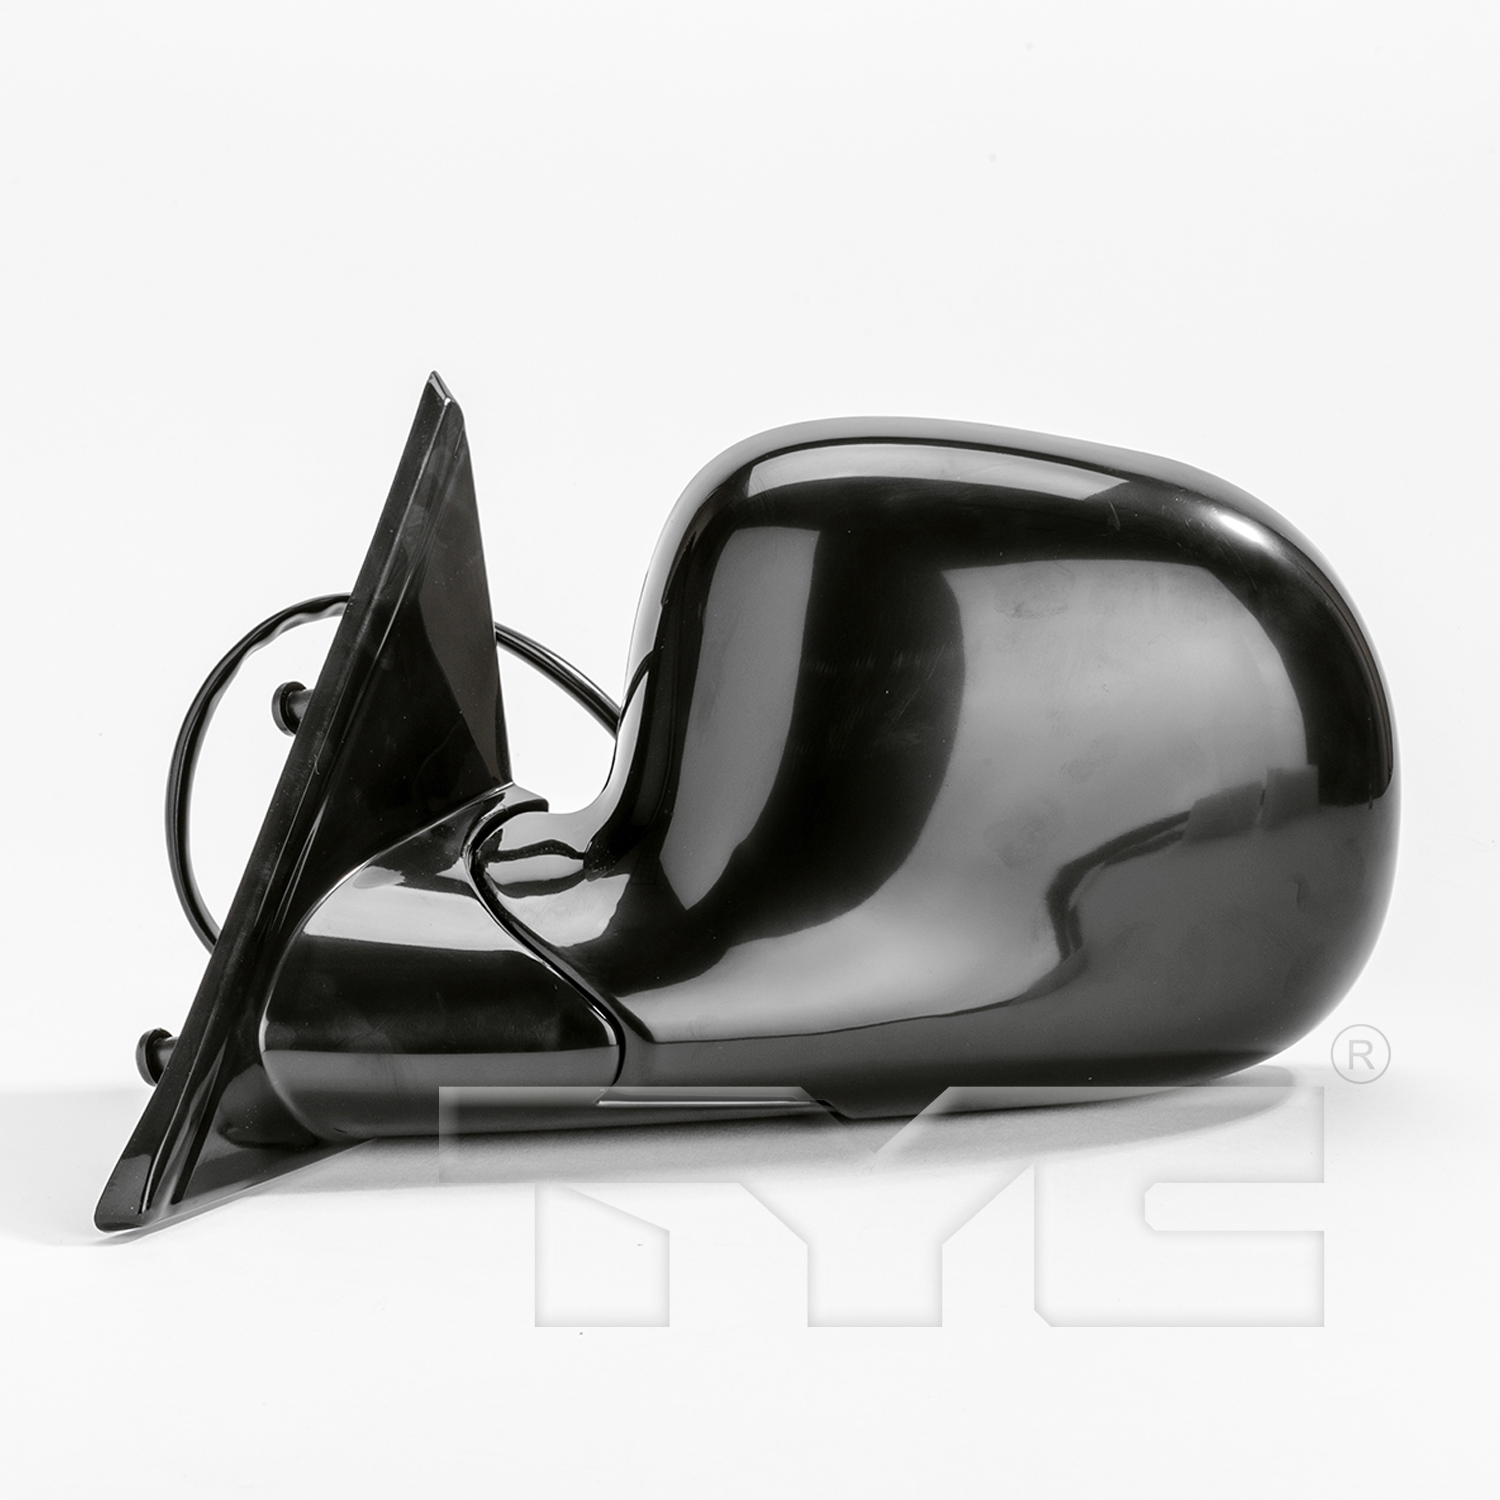 Aftermarket MIRRORS for CHEVROLET - S10, S10,98-98,LT Mirror outside rear view